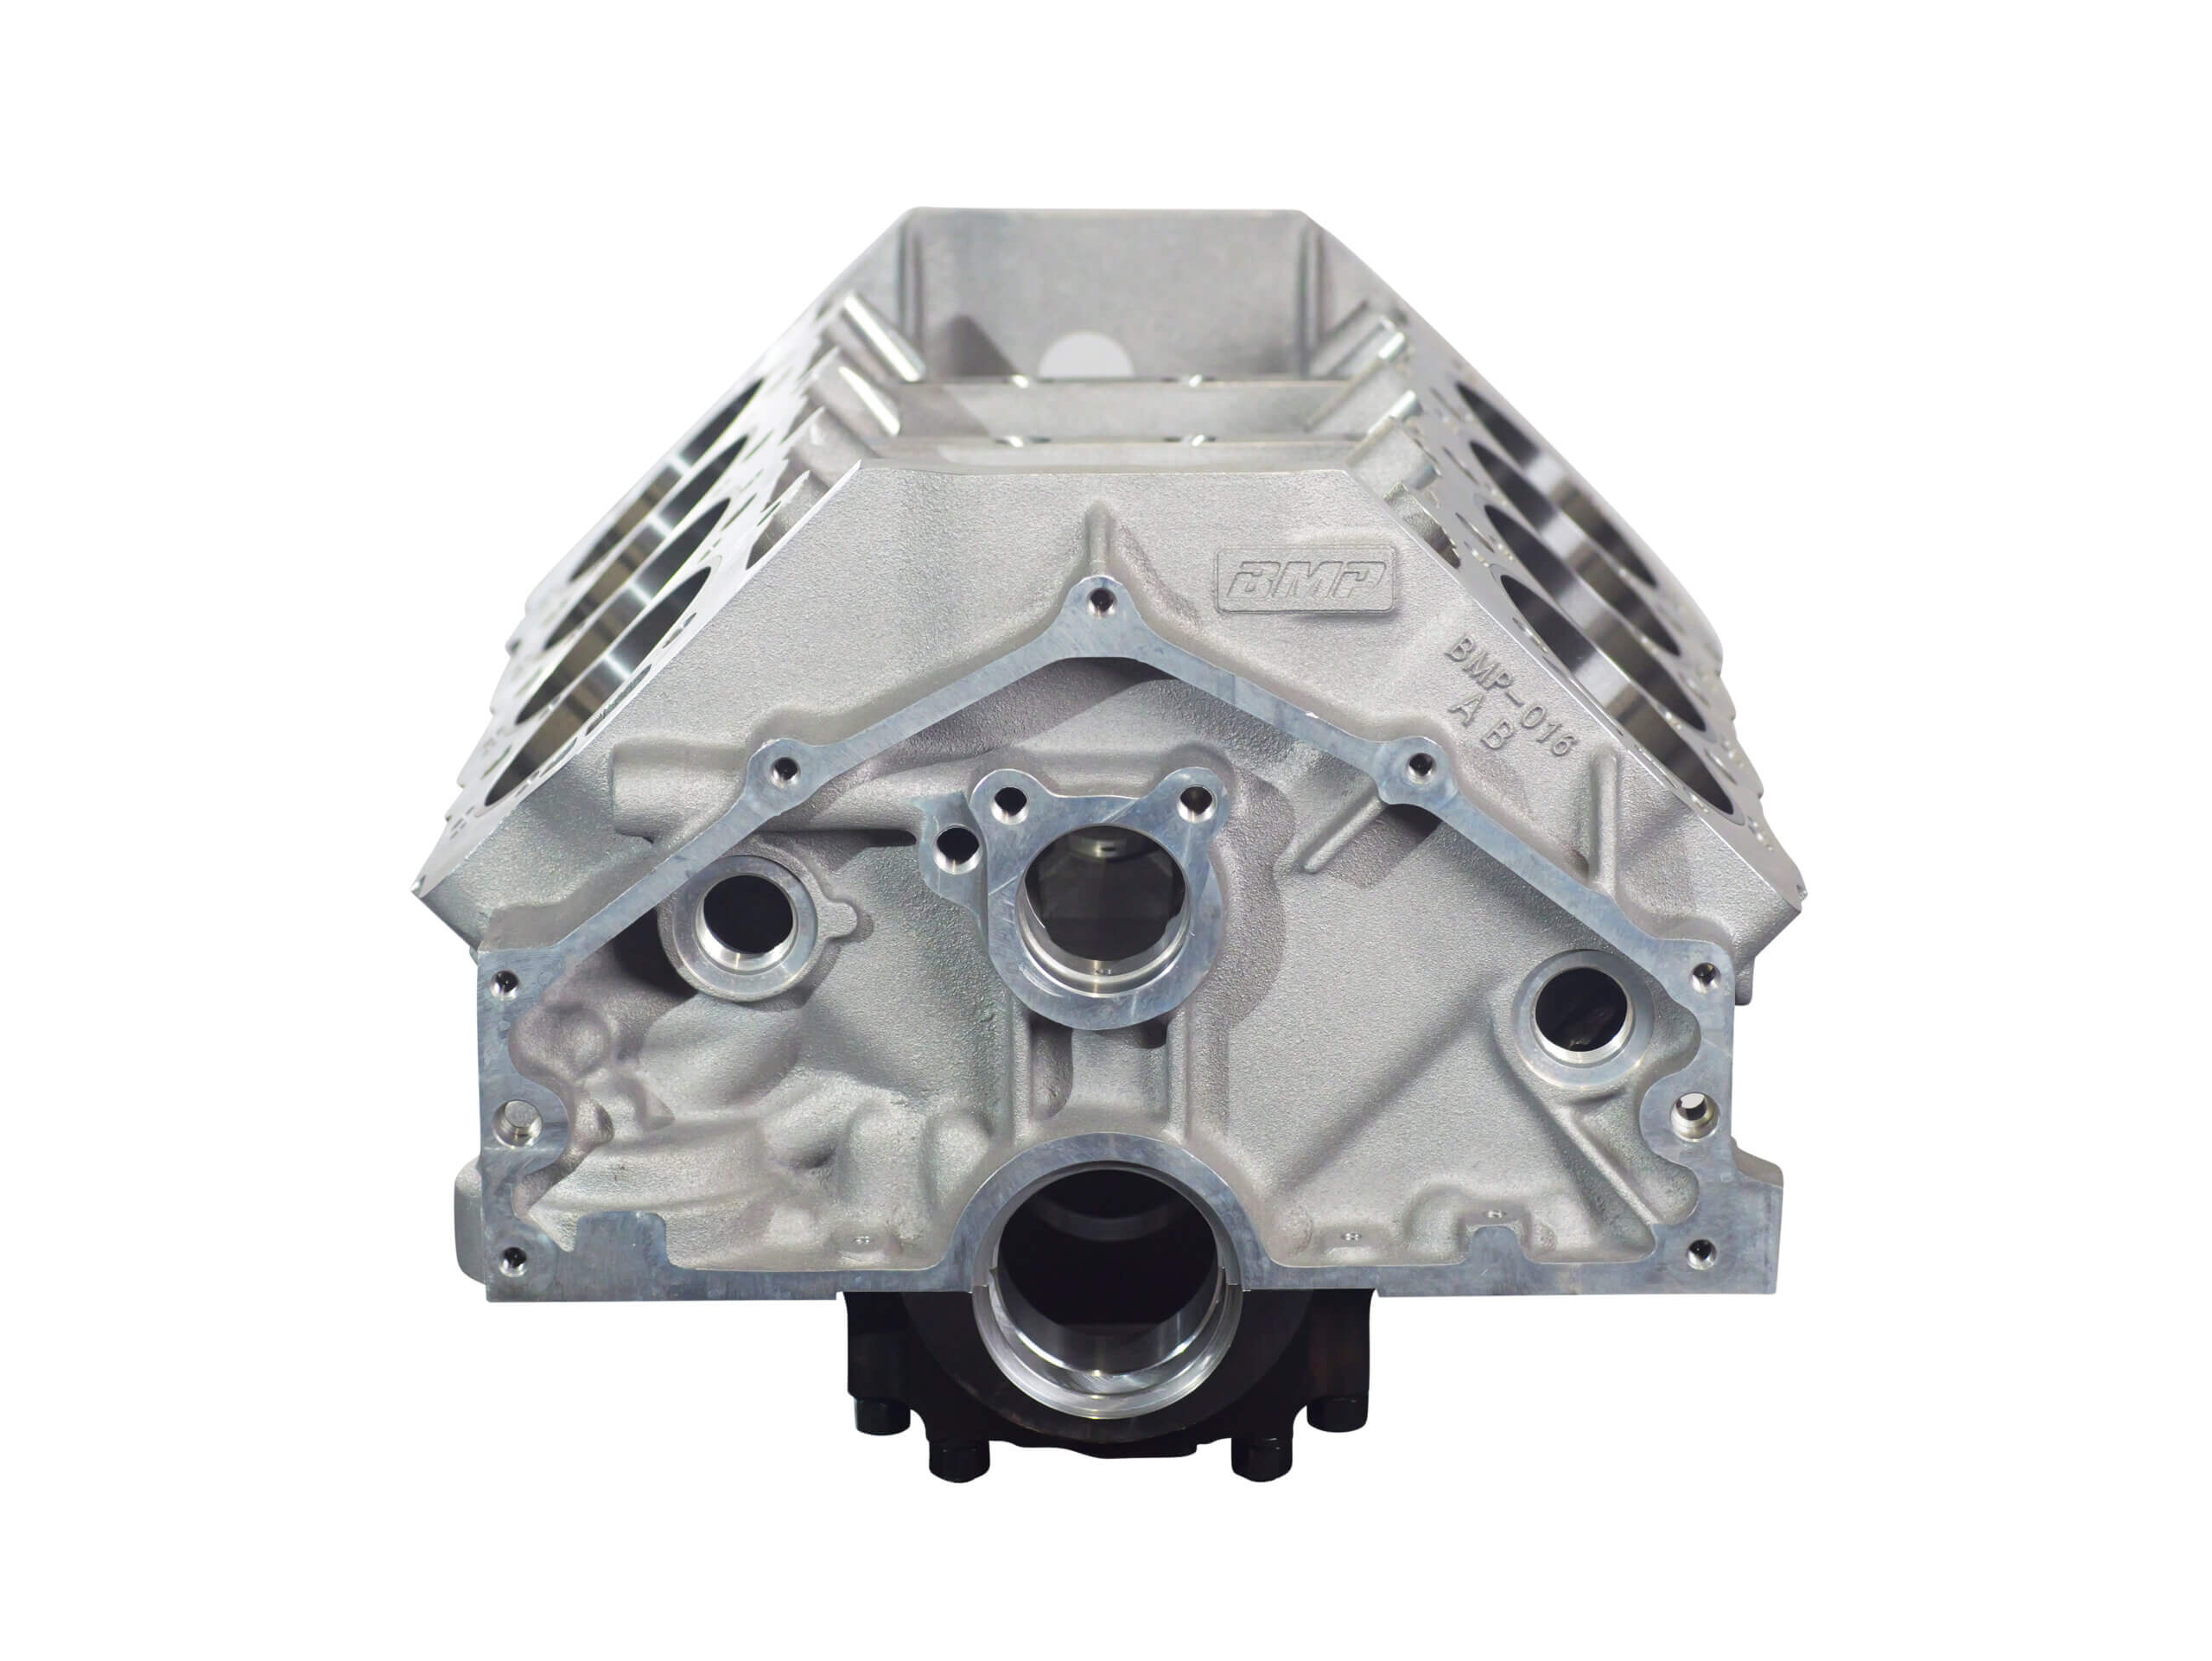 Bill Mitchell Products BBC 357T6 Aluminum Engine Block Chevy Big Block 454 Mains, 10.200"Deck, 4.240" Bore. Standard Cam(includes, Screw in Freeze plugs, Cam plug, All dowel pins and Pipe plugs) 085510